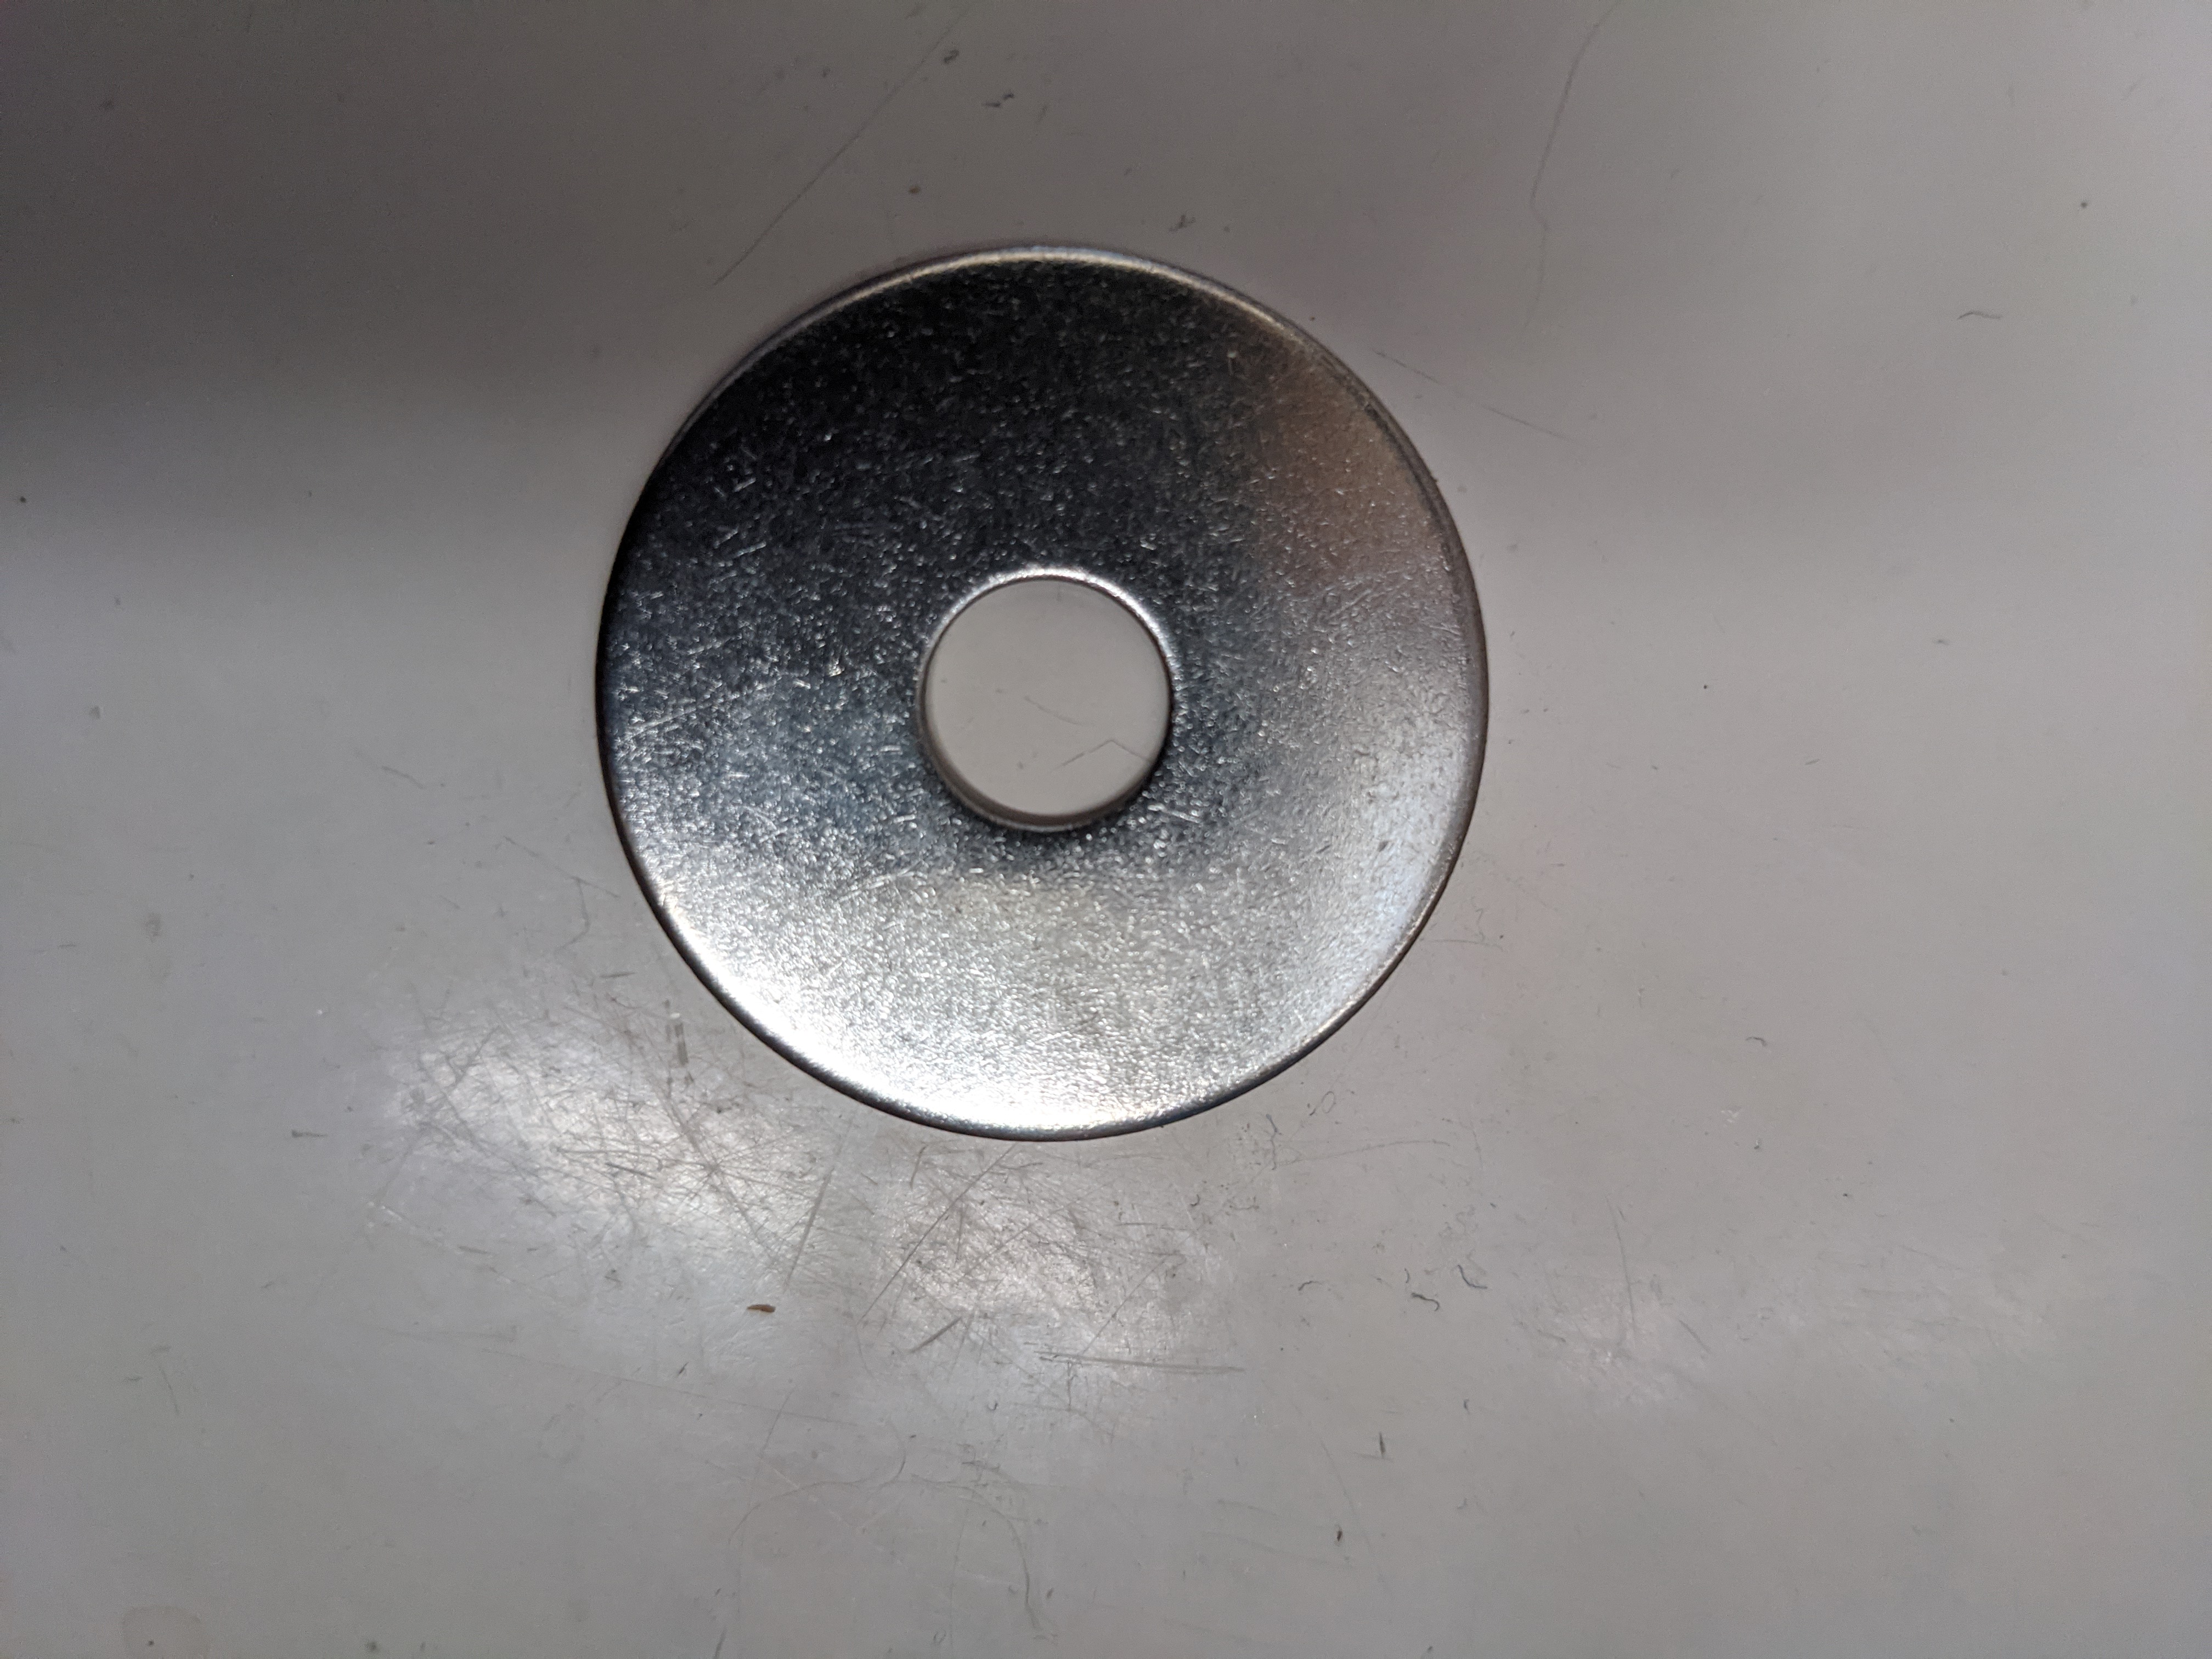 3/8 fender washer used to back